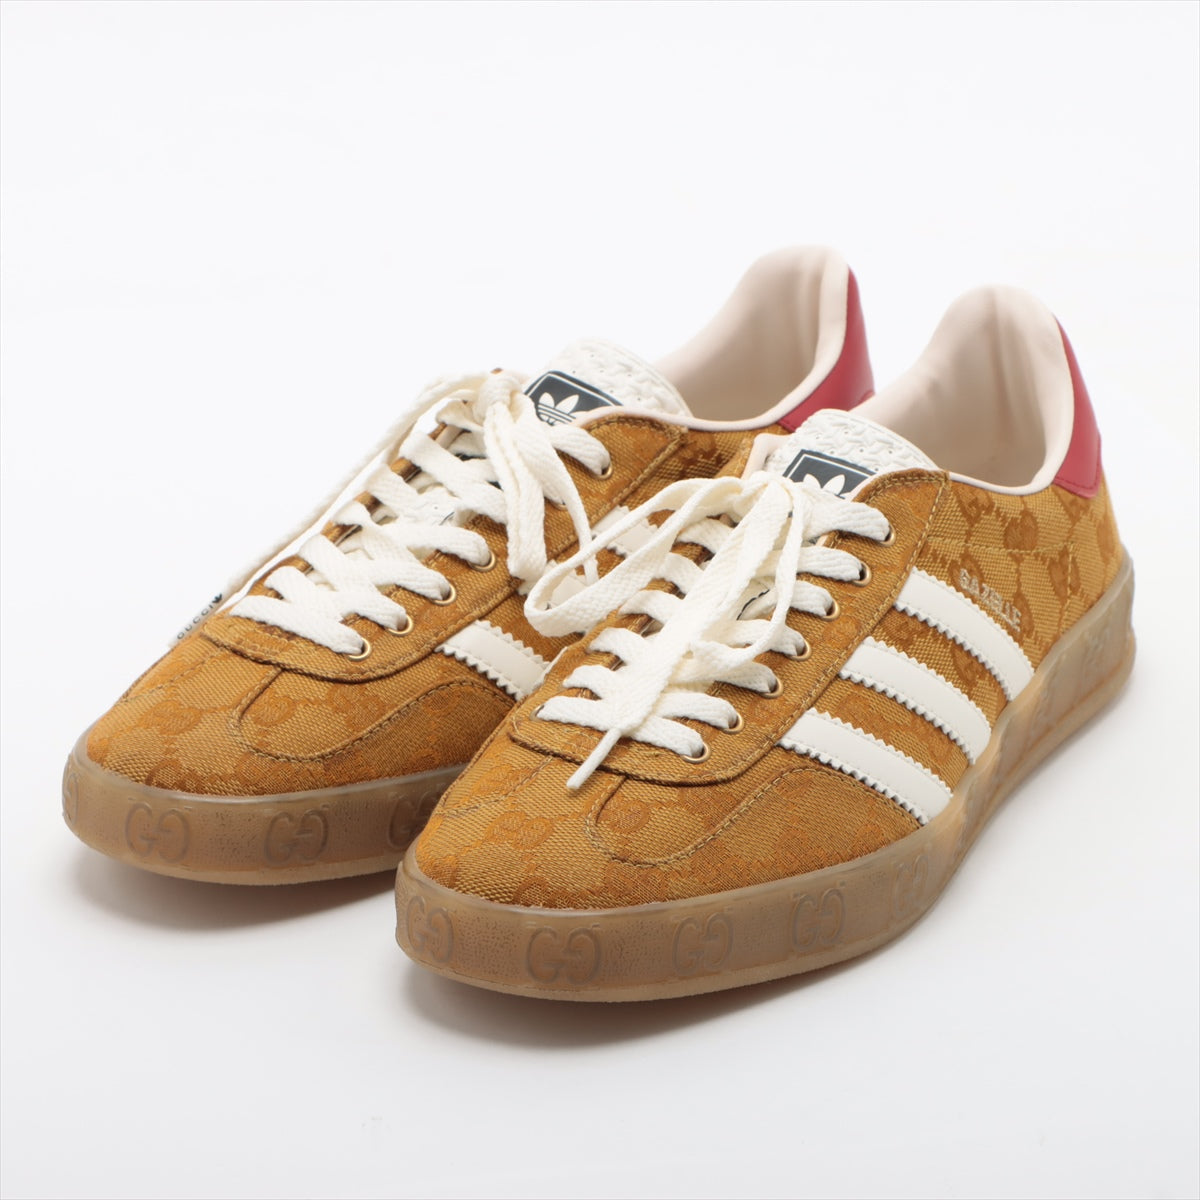 Gucci x adidas Gazelle Canvas & leather Sneakers 25.5㎝ Ladies' Brown HQ8850